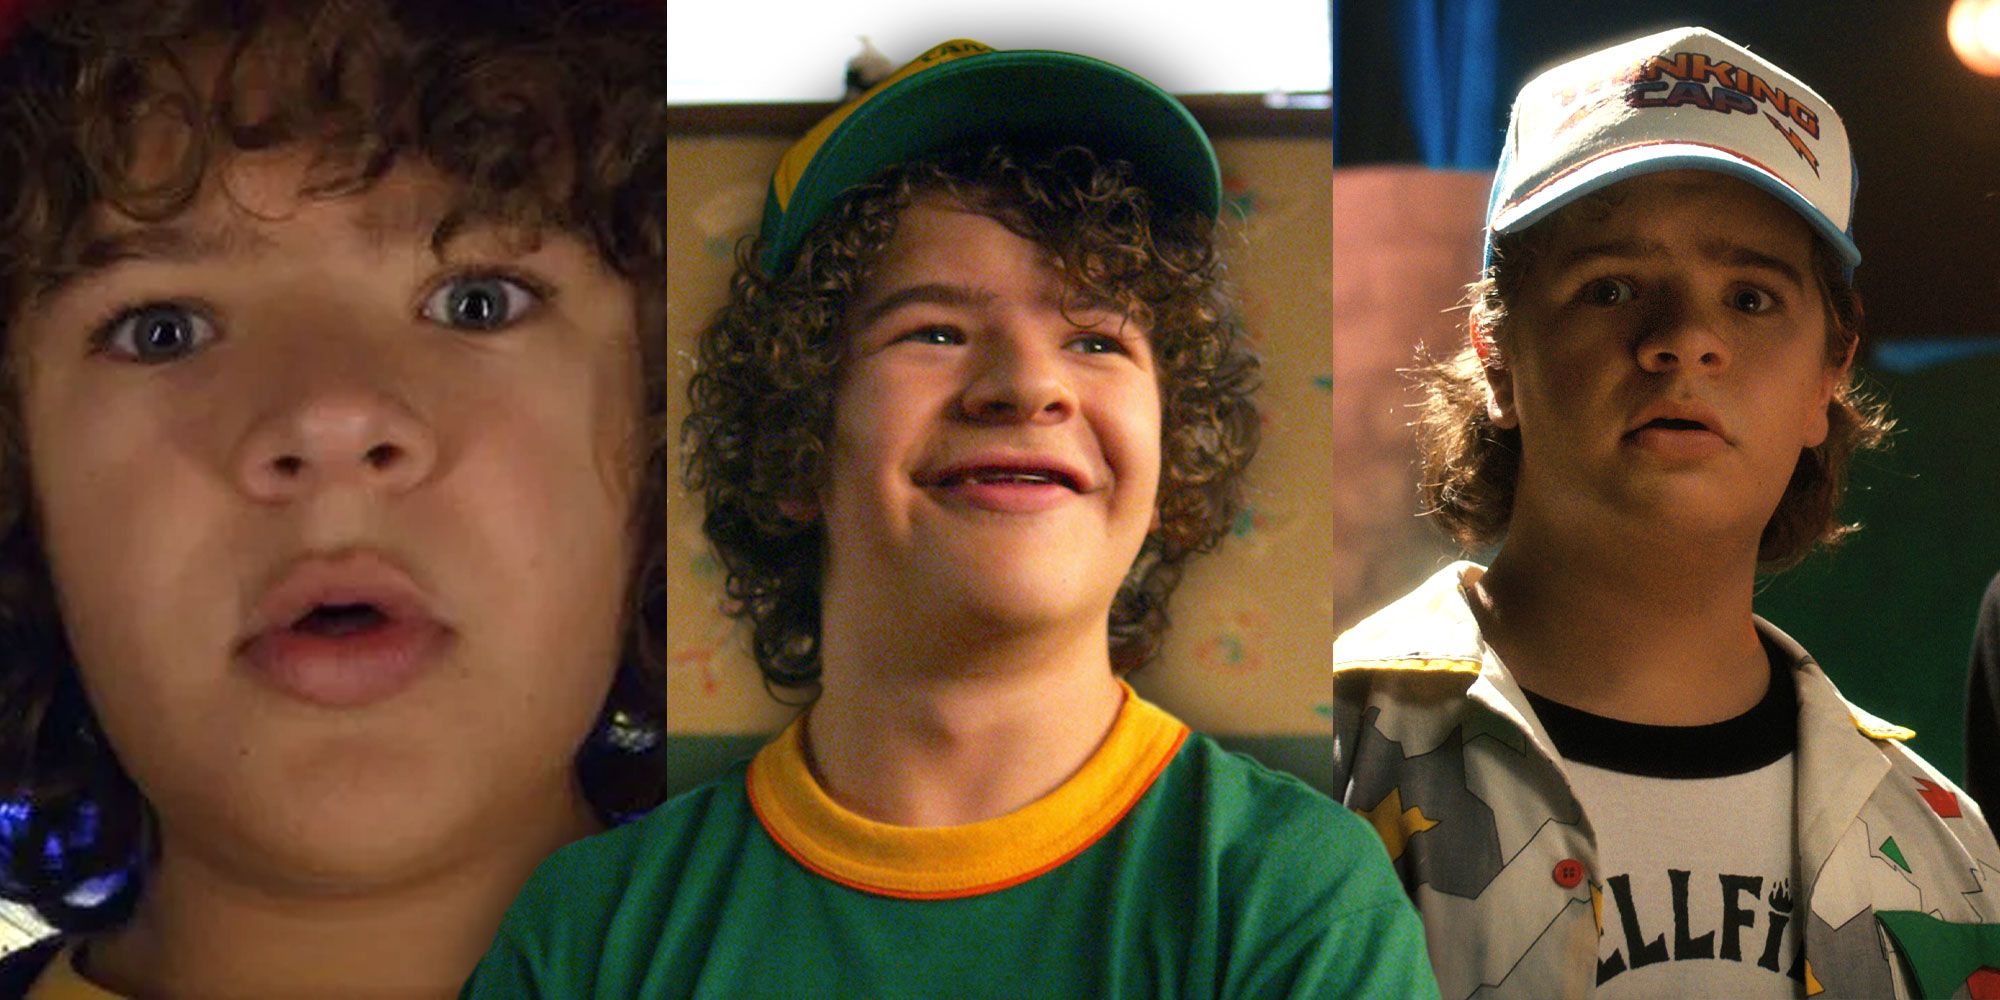 A blended image features Justin in Seasons 2, 3, and 4 of Stranger Things